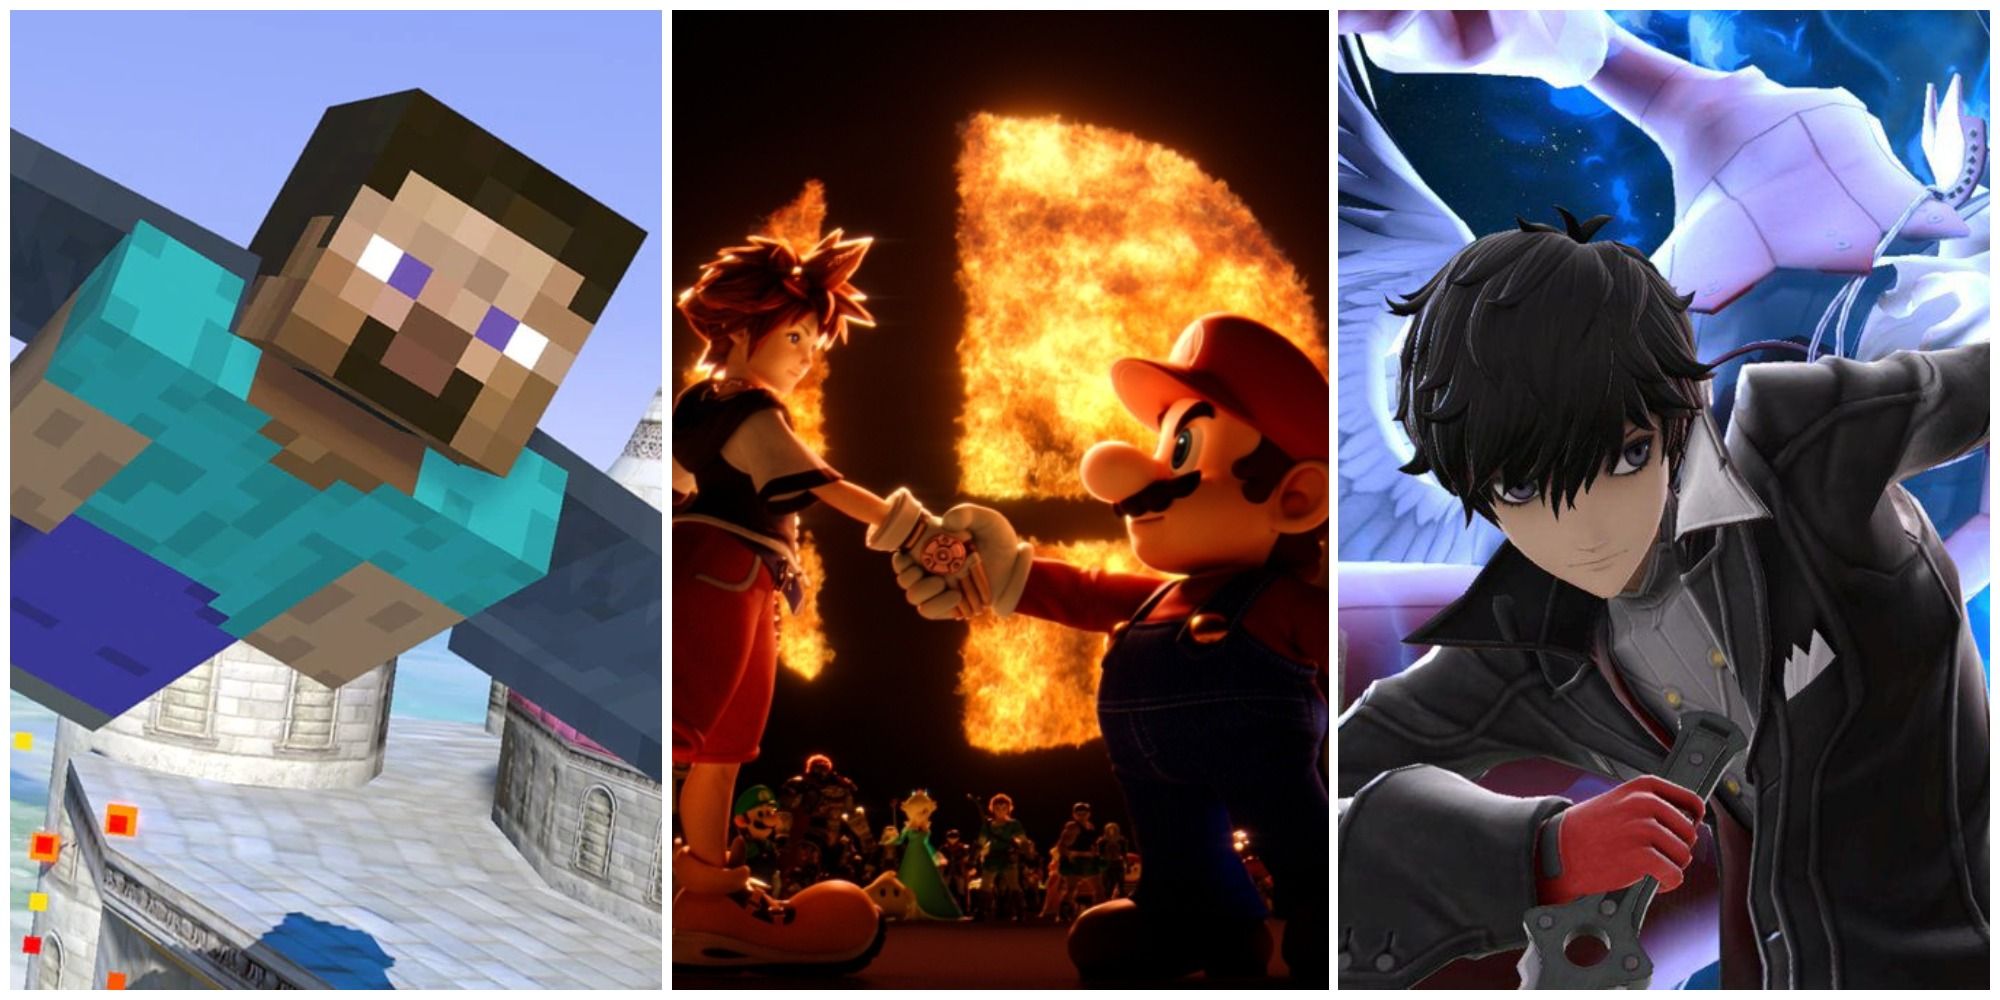 The Best Super Smash Bros. Ultimate Characters, Ranked by Top Players